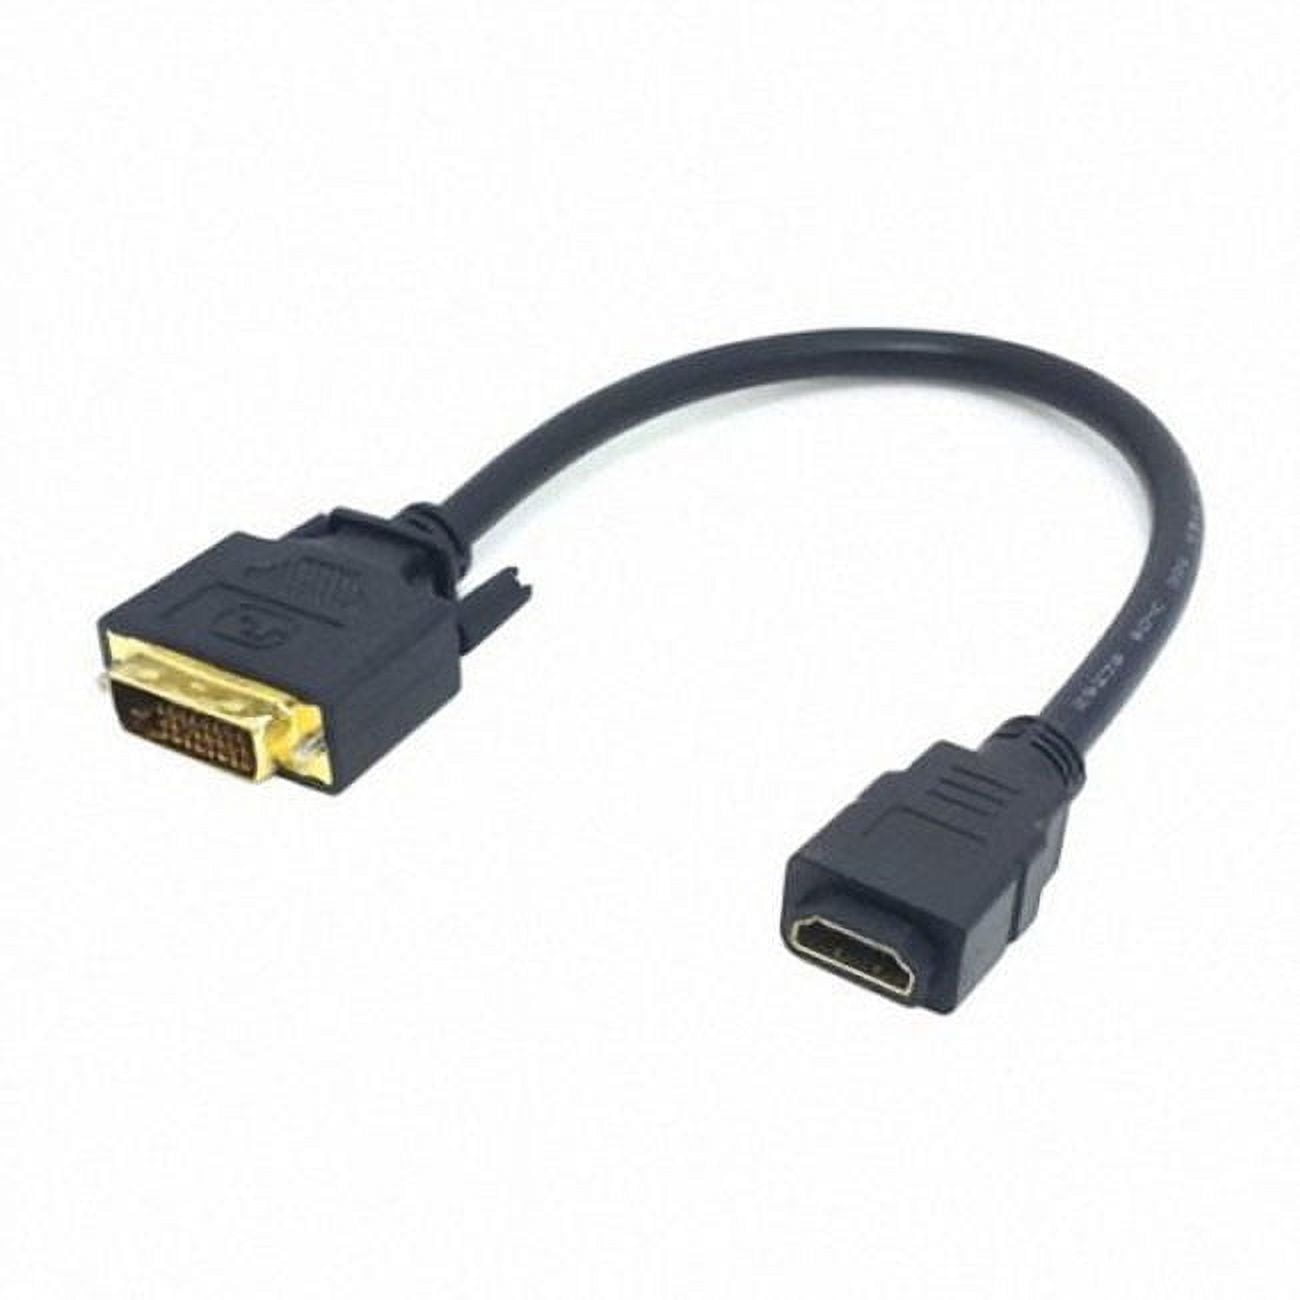 HTGuoji USB to HDMI Adapter Cable Cord - USB 2.0 Type A Male to